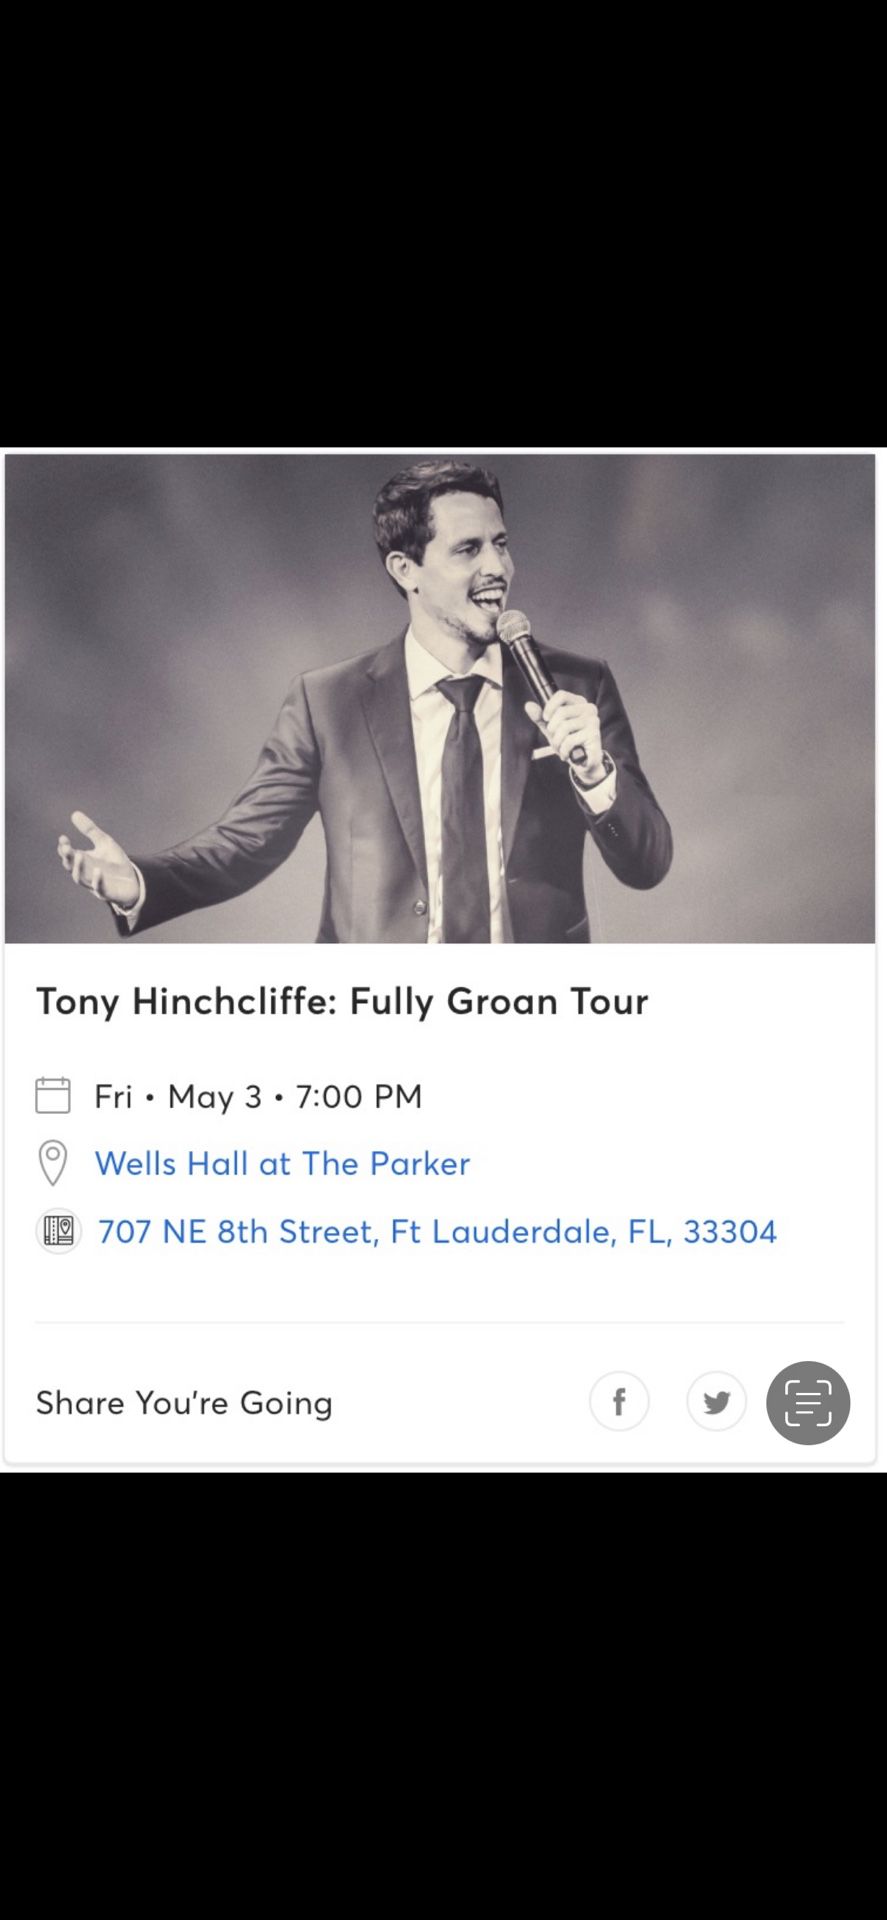 Tony Hinchcliffe Fully Groan Tour May 3rd